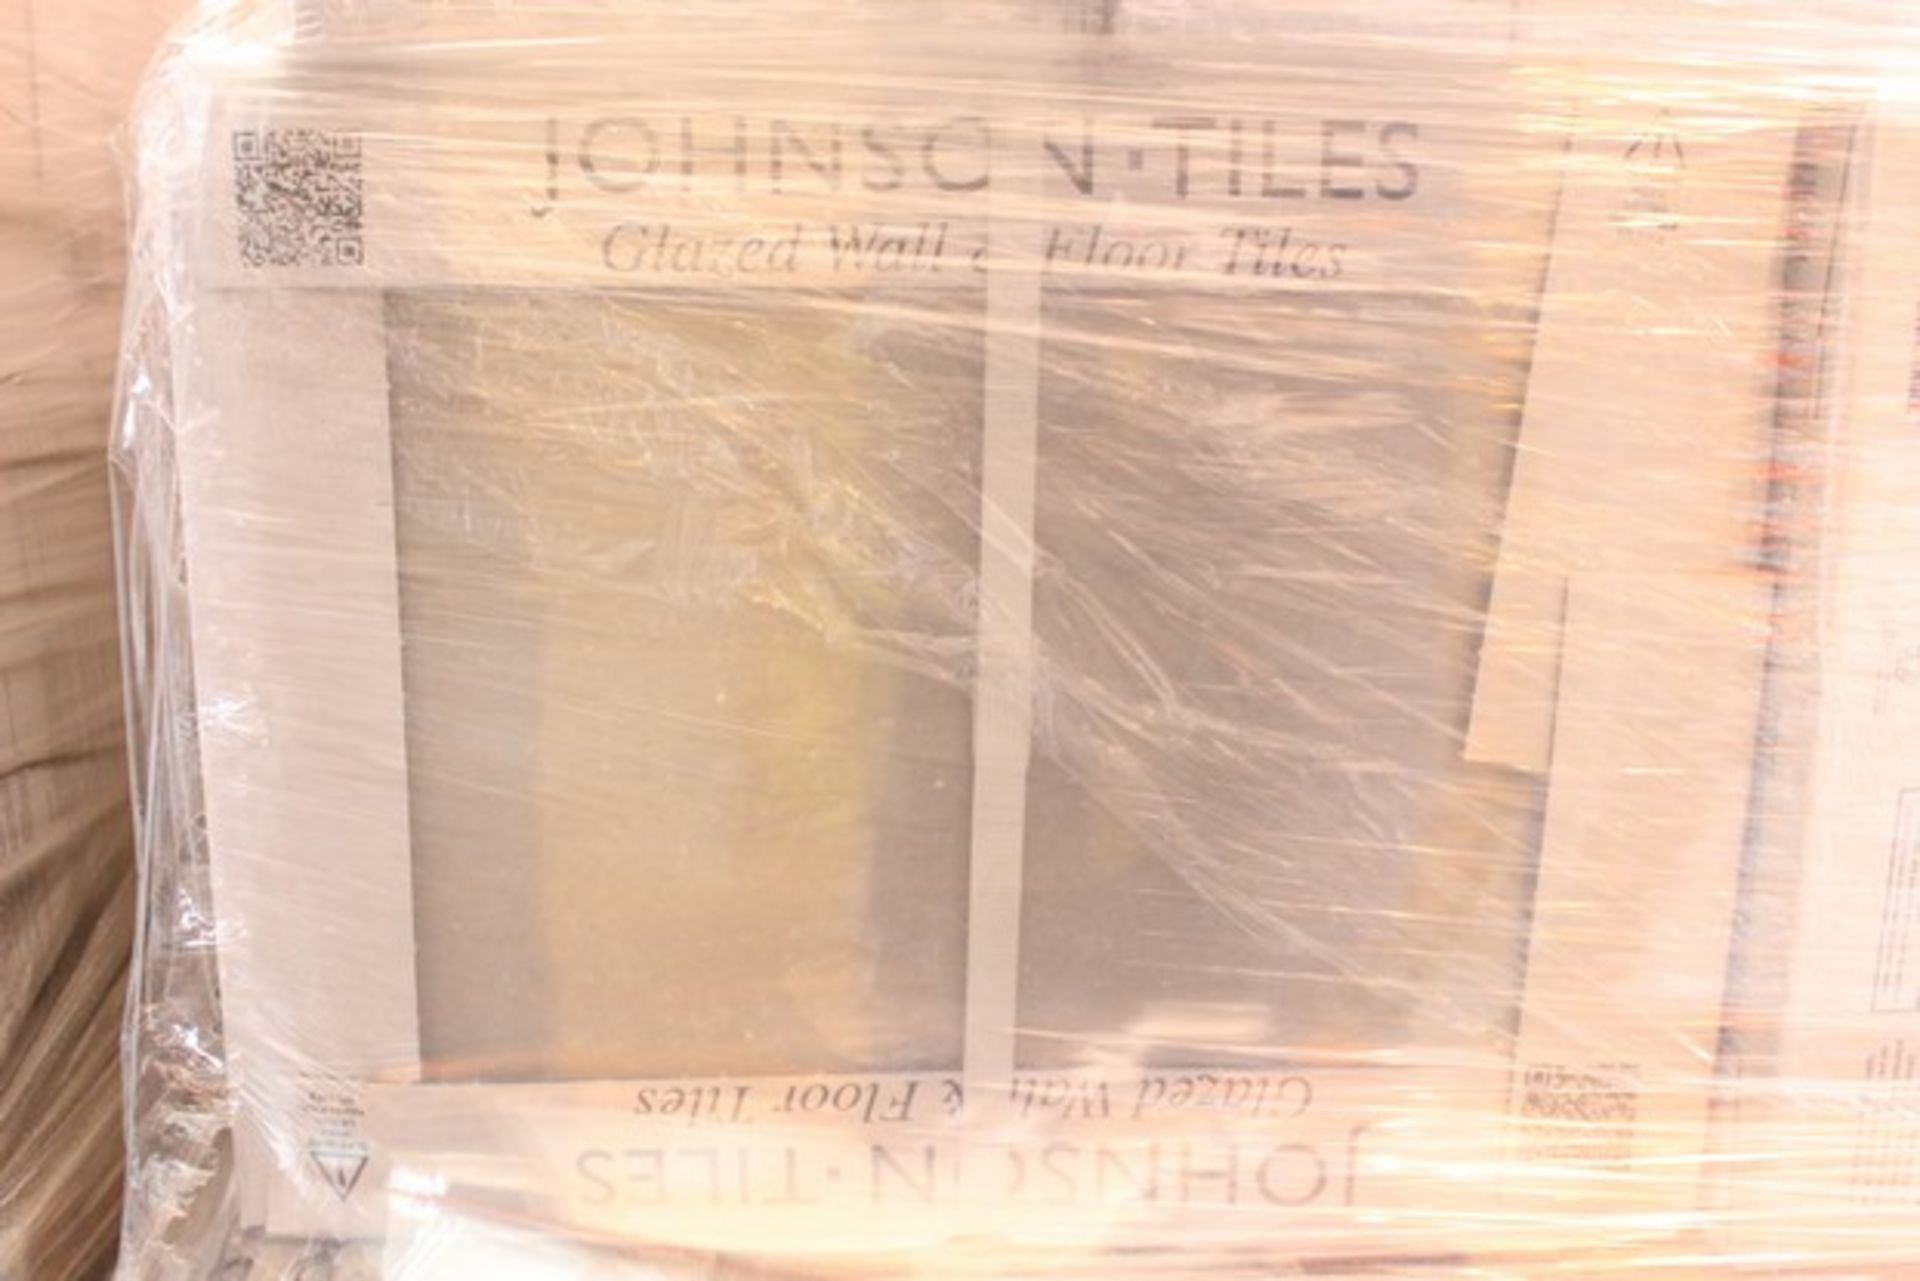 48X FACTORY SEALED BY JOHNSON TILES GLAZED WALL AND FLOOR TILES 360 X 270MM RRP £19.99 COMBINED - Image 2 of 2